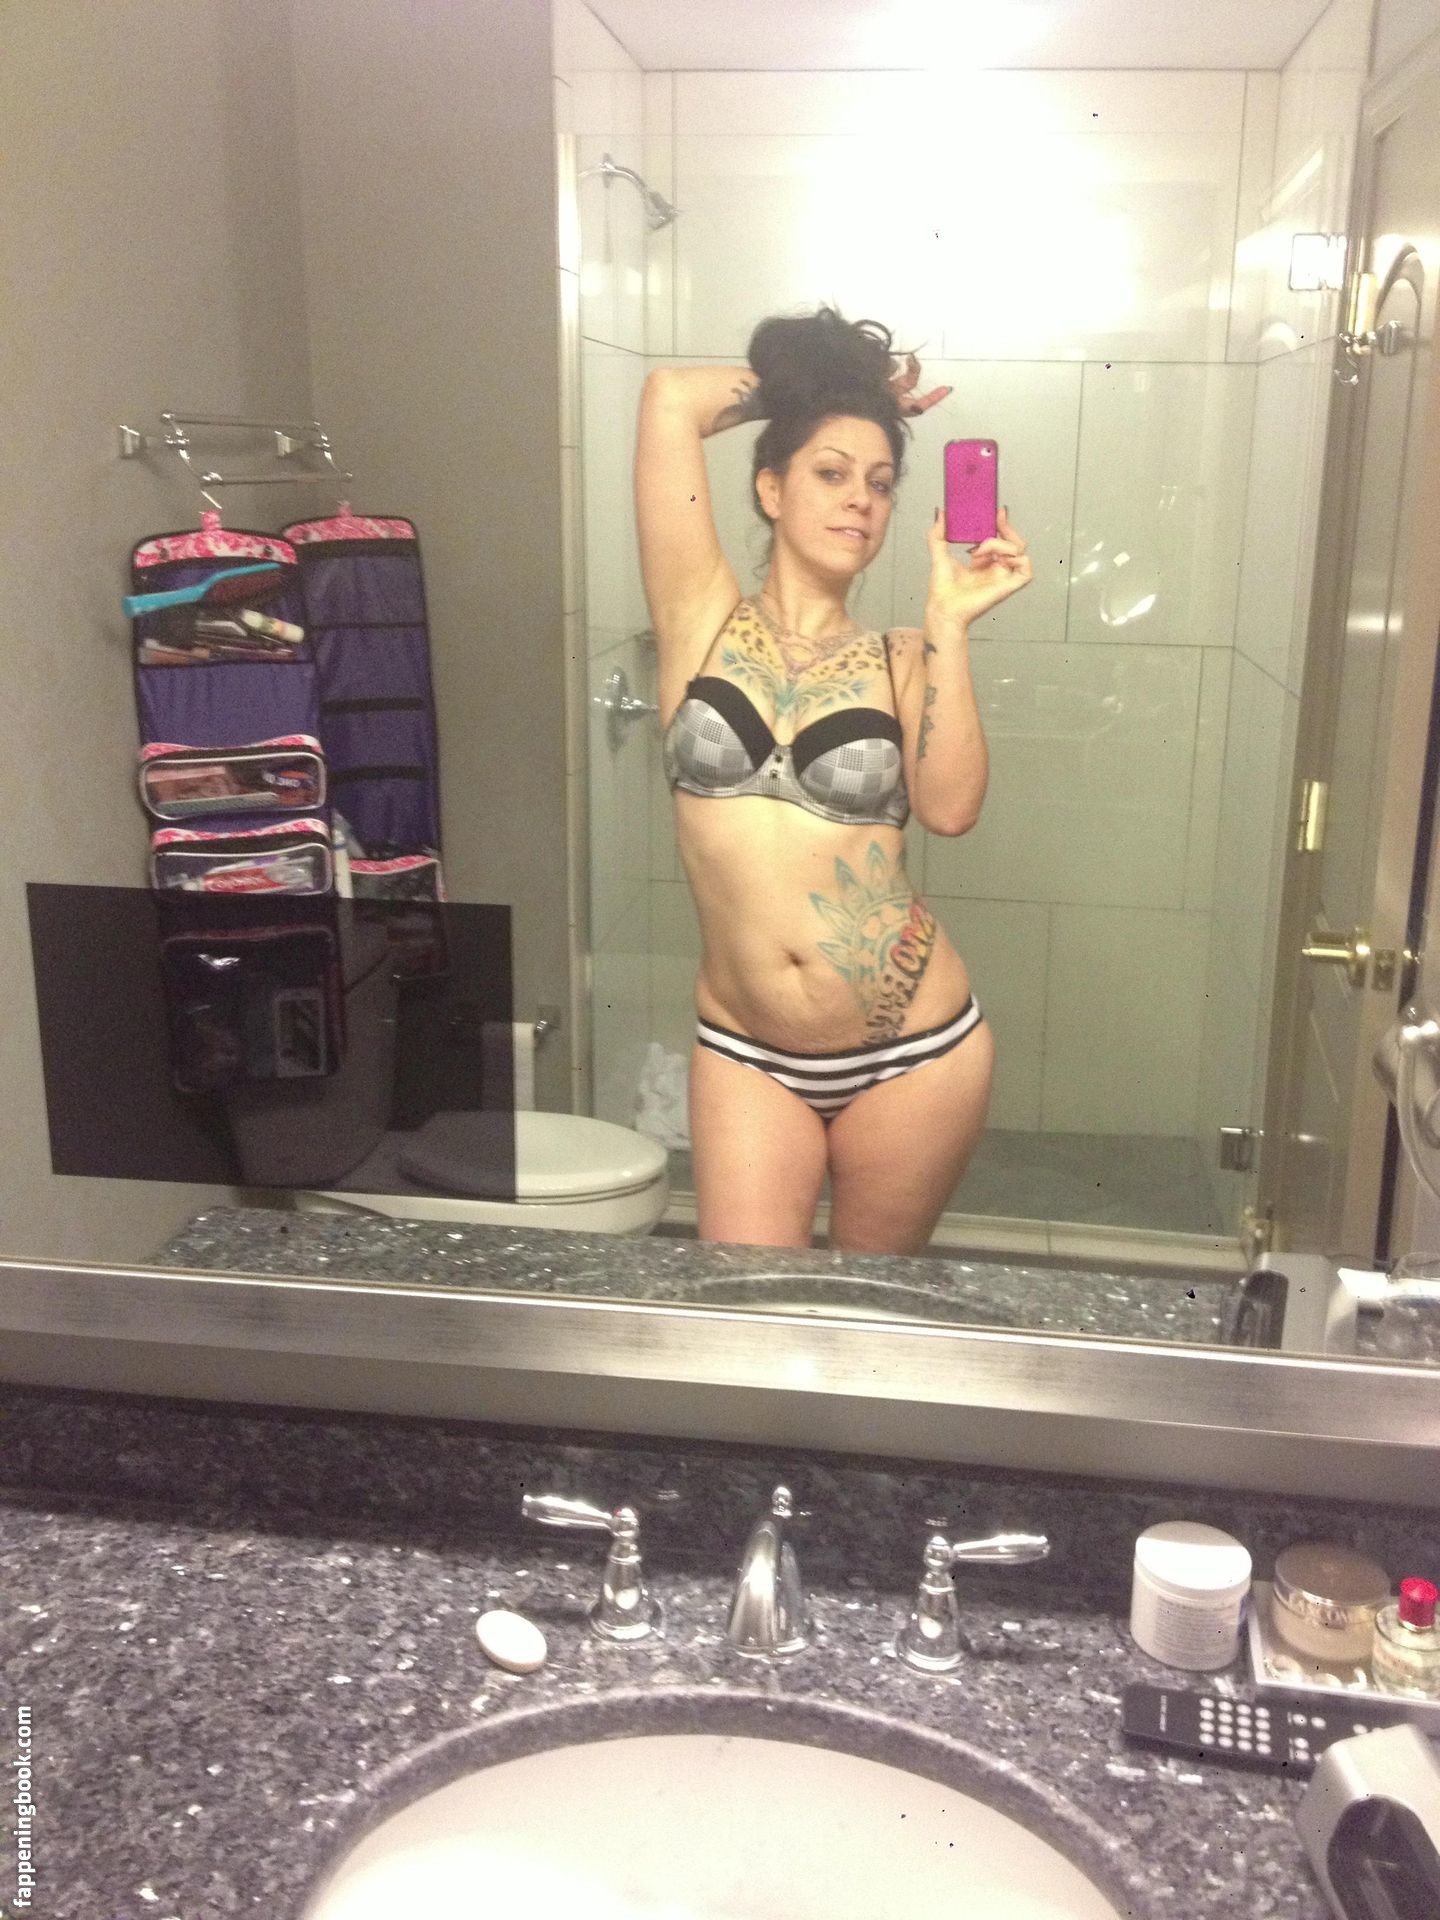 Danielle Colby Nude